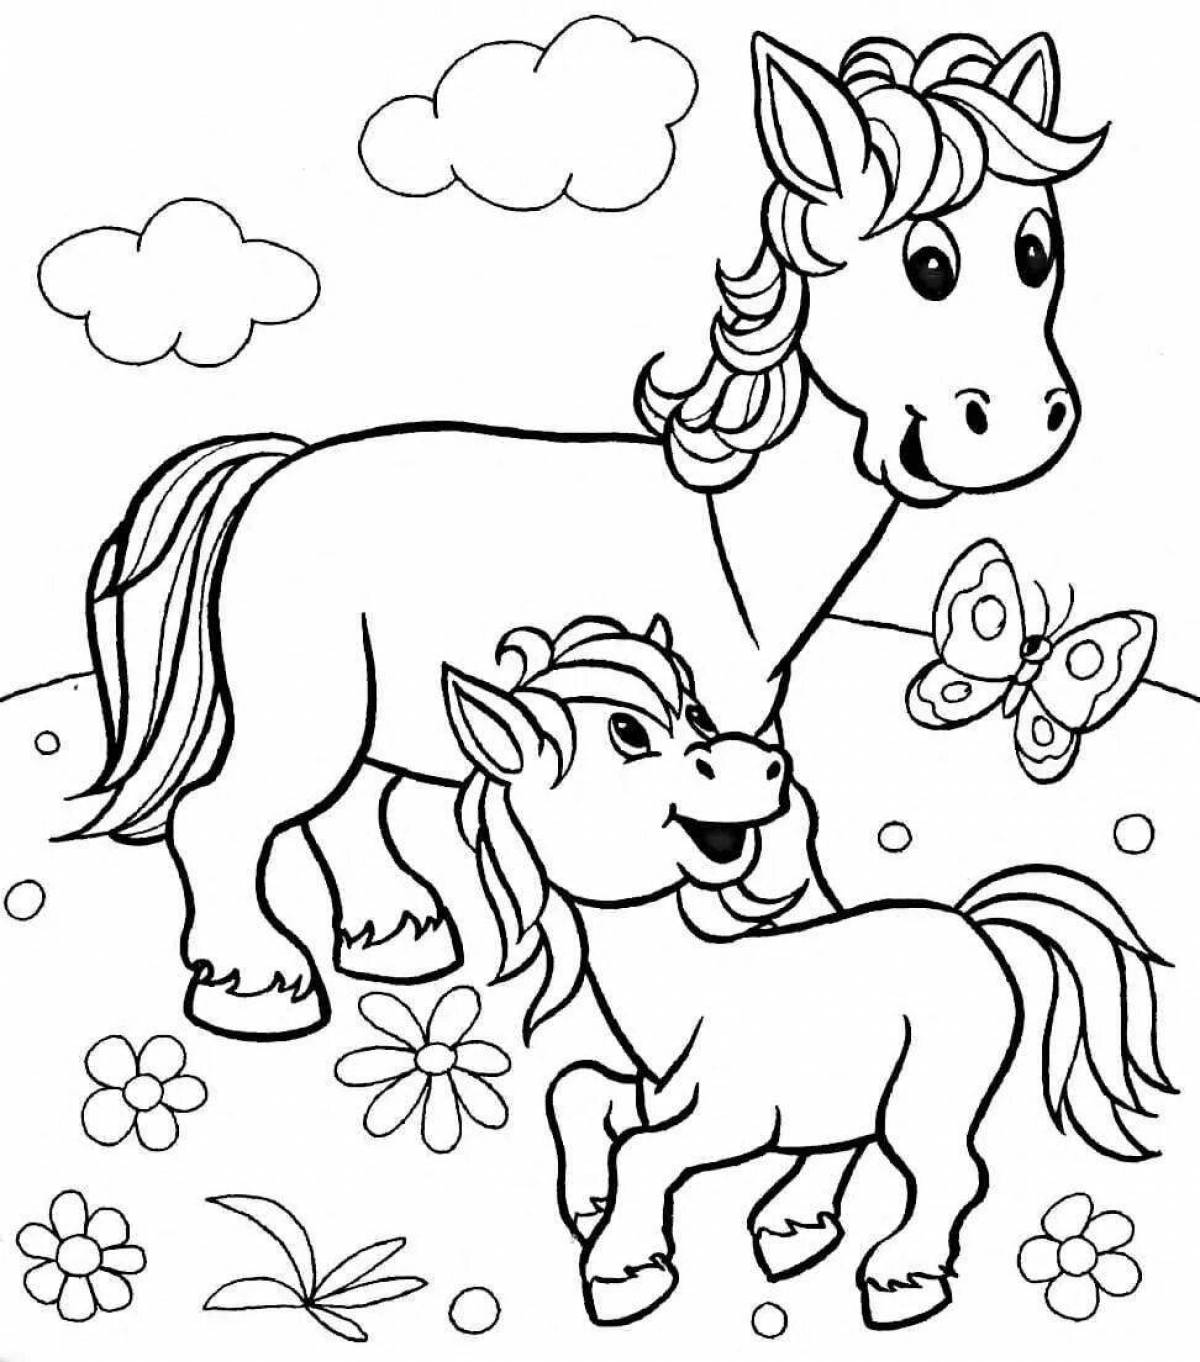 Bright pet coloring page